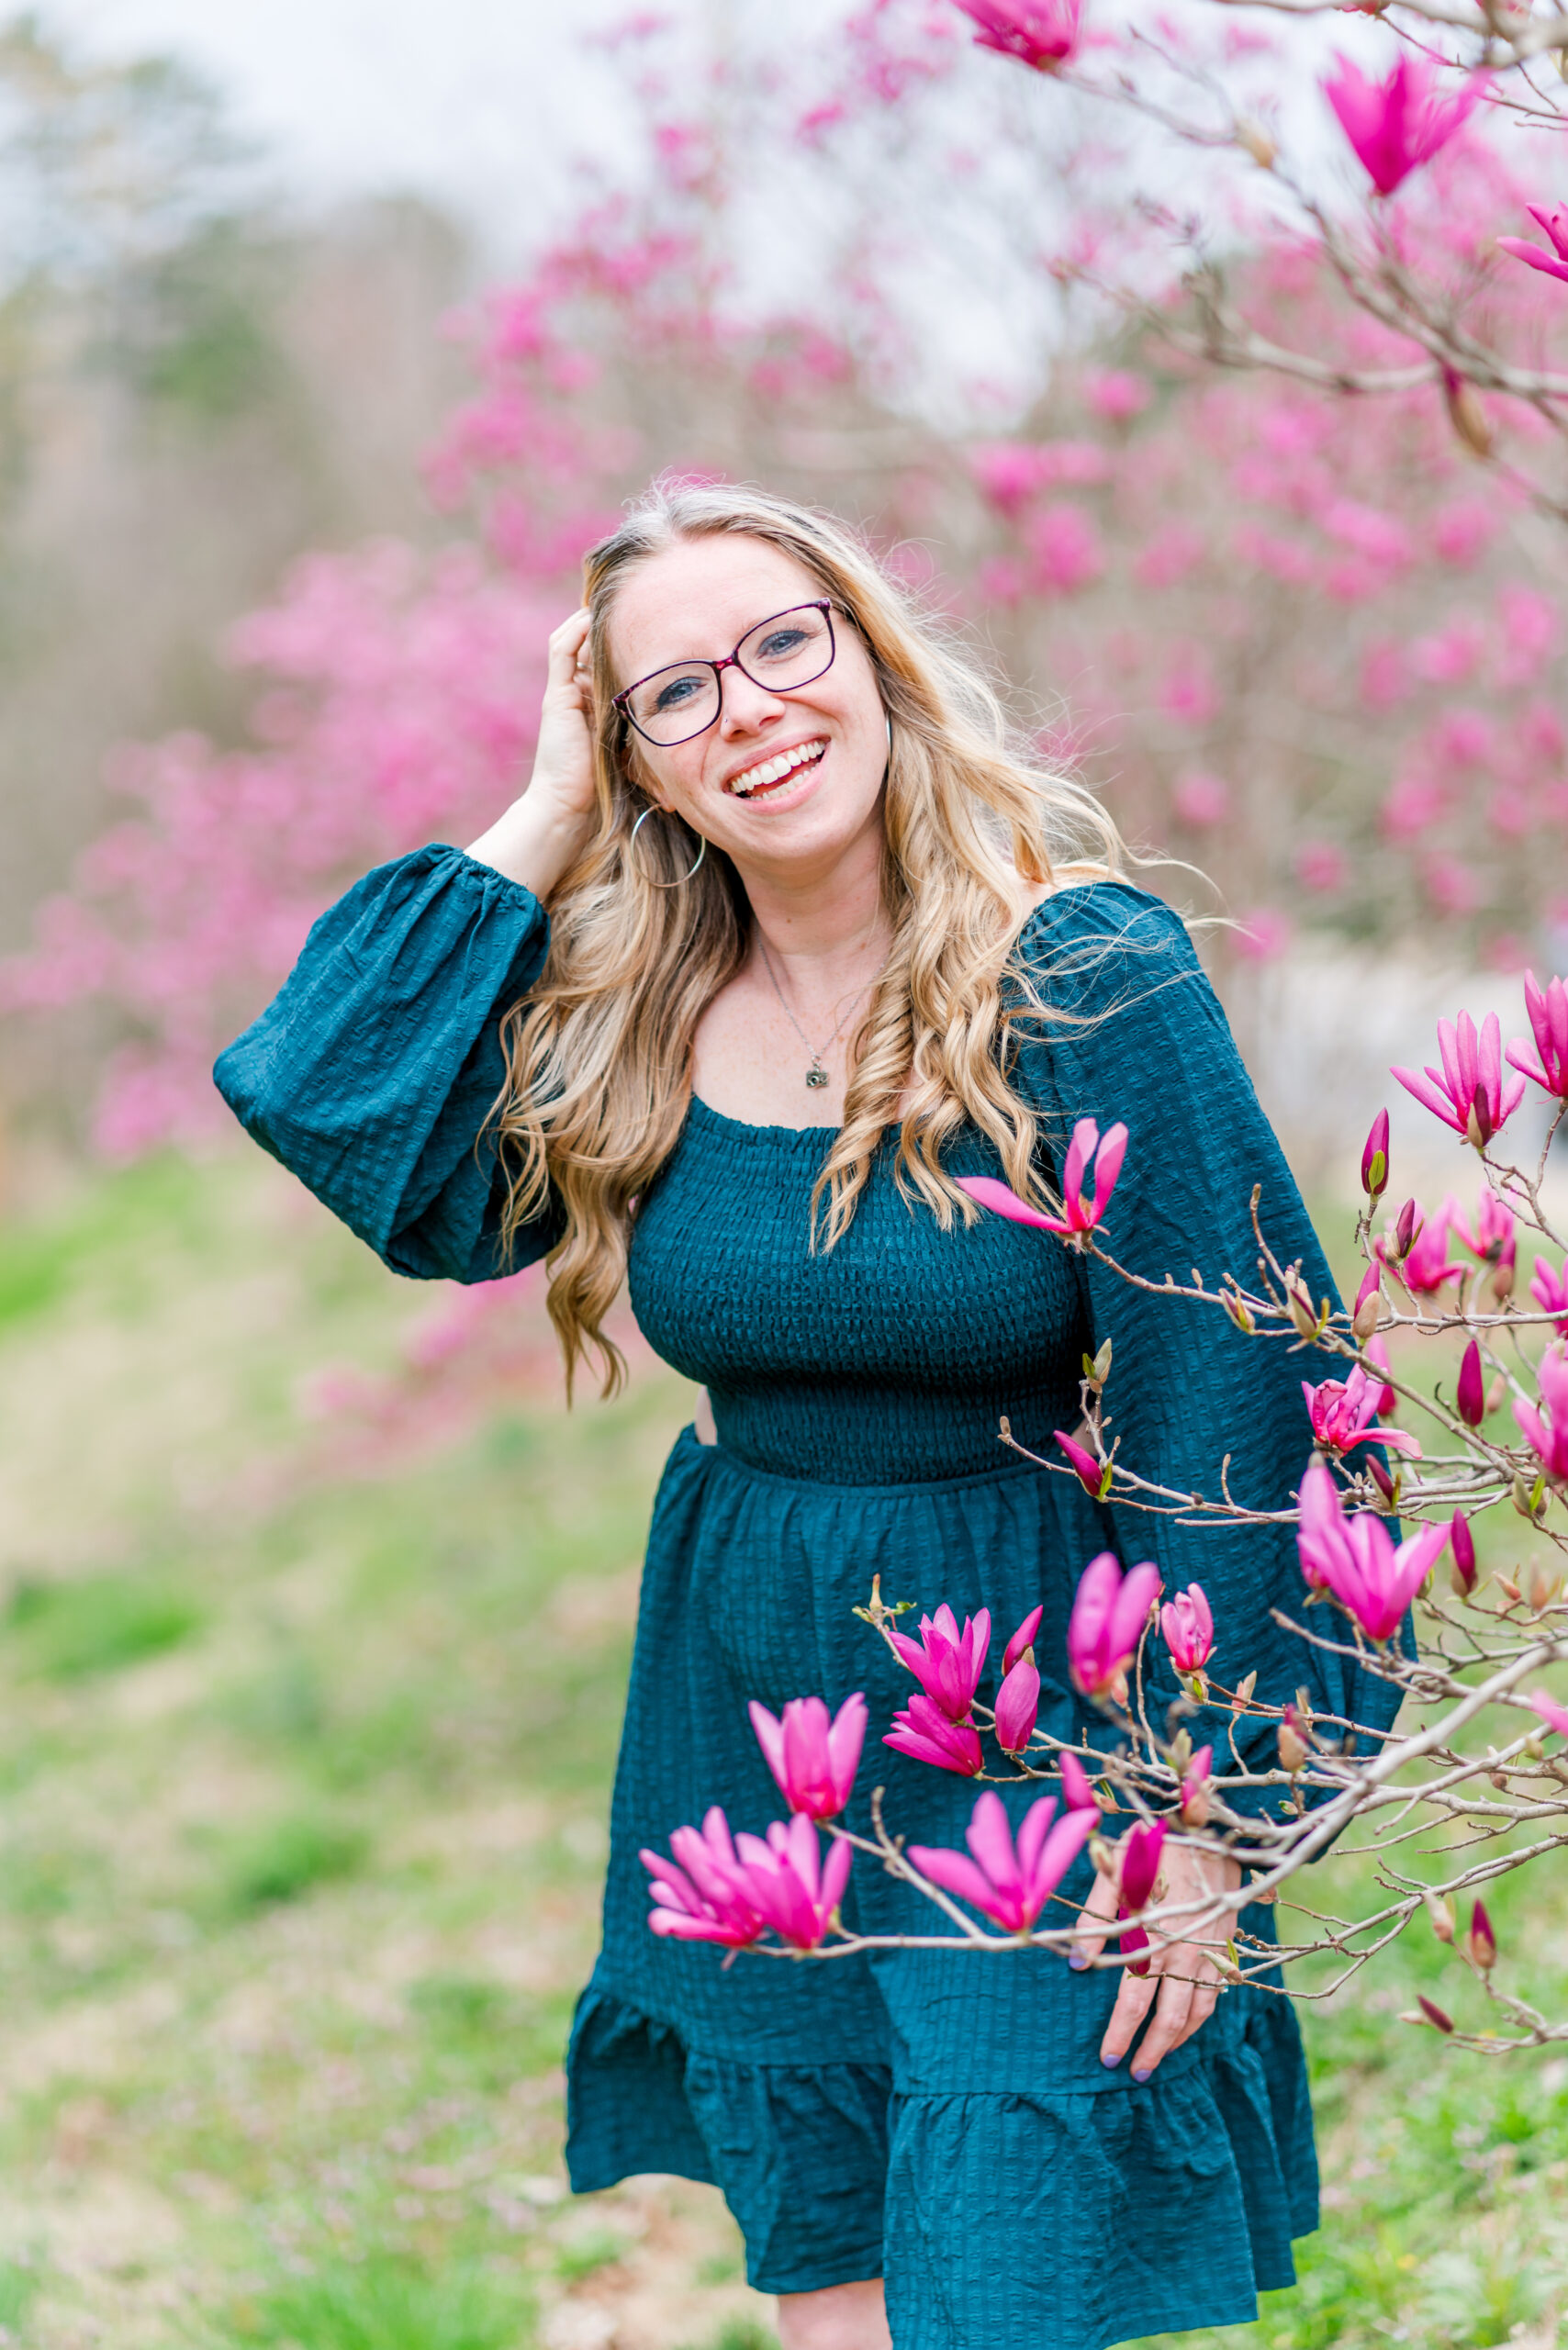 Stephanie smiles in a teal dress while standing in a "field" of bright pink tulip magnolias.